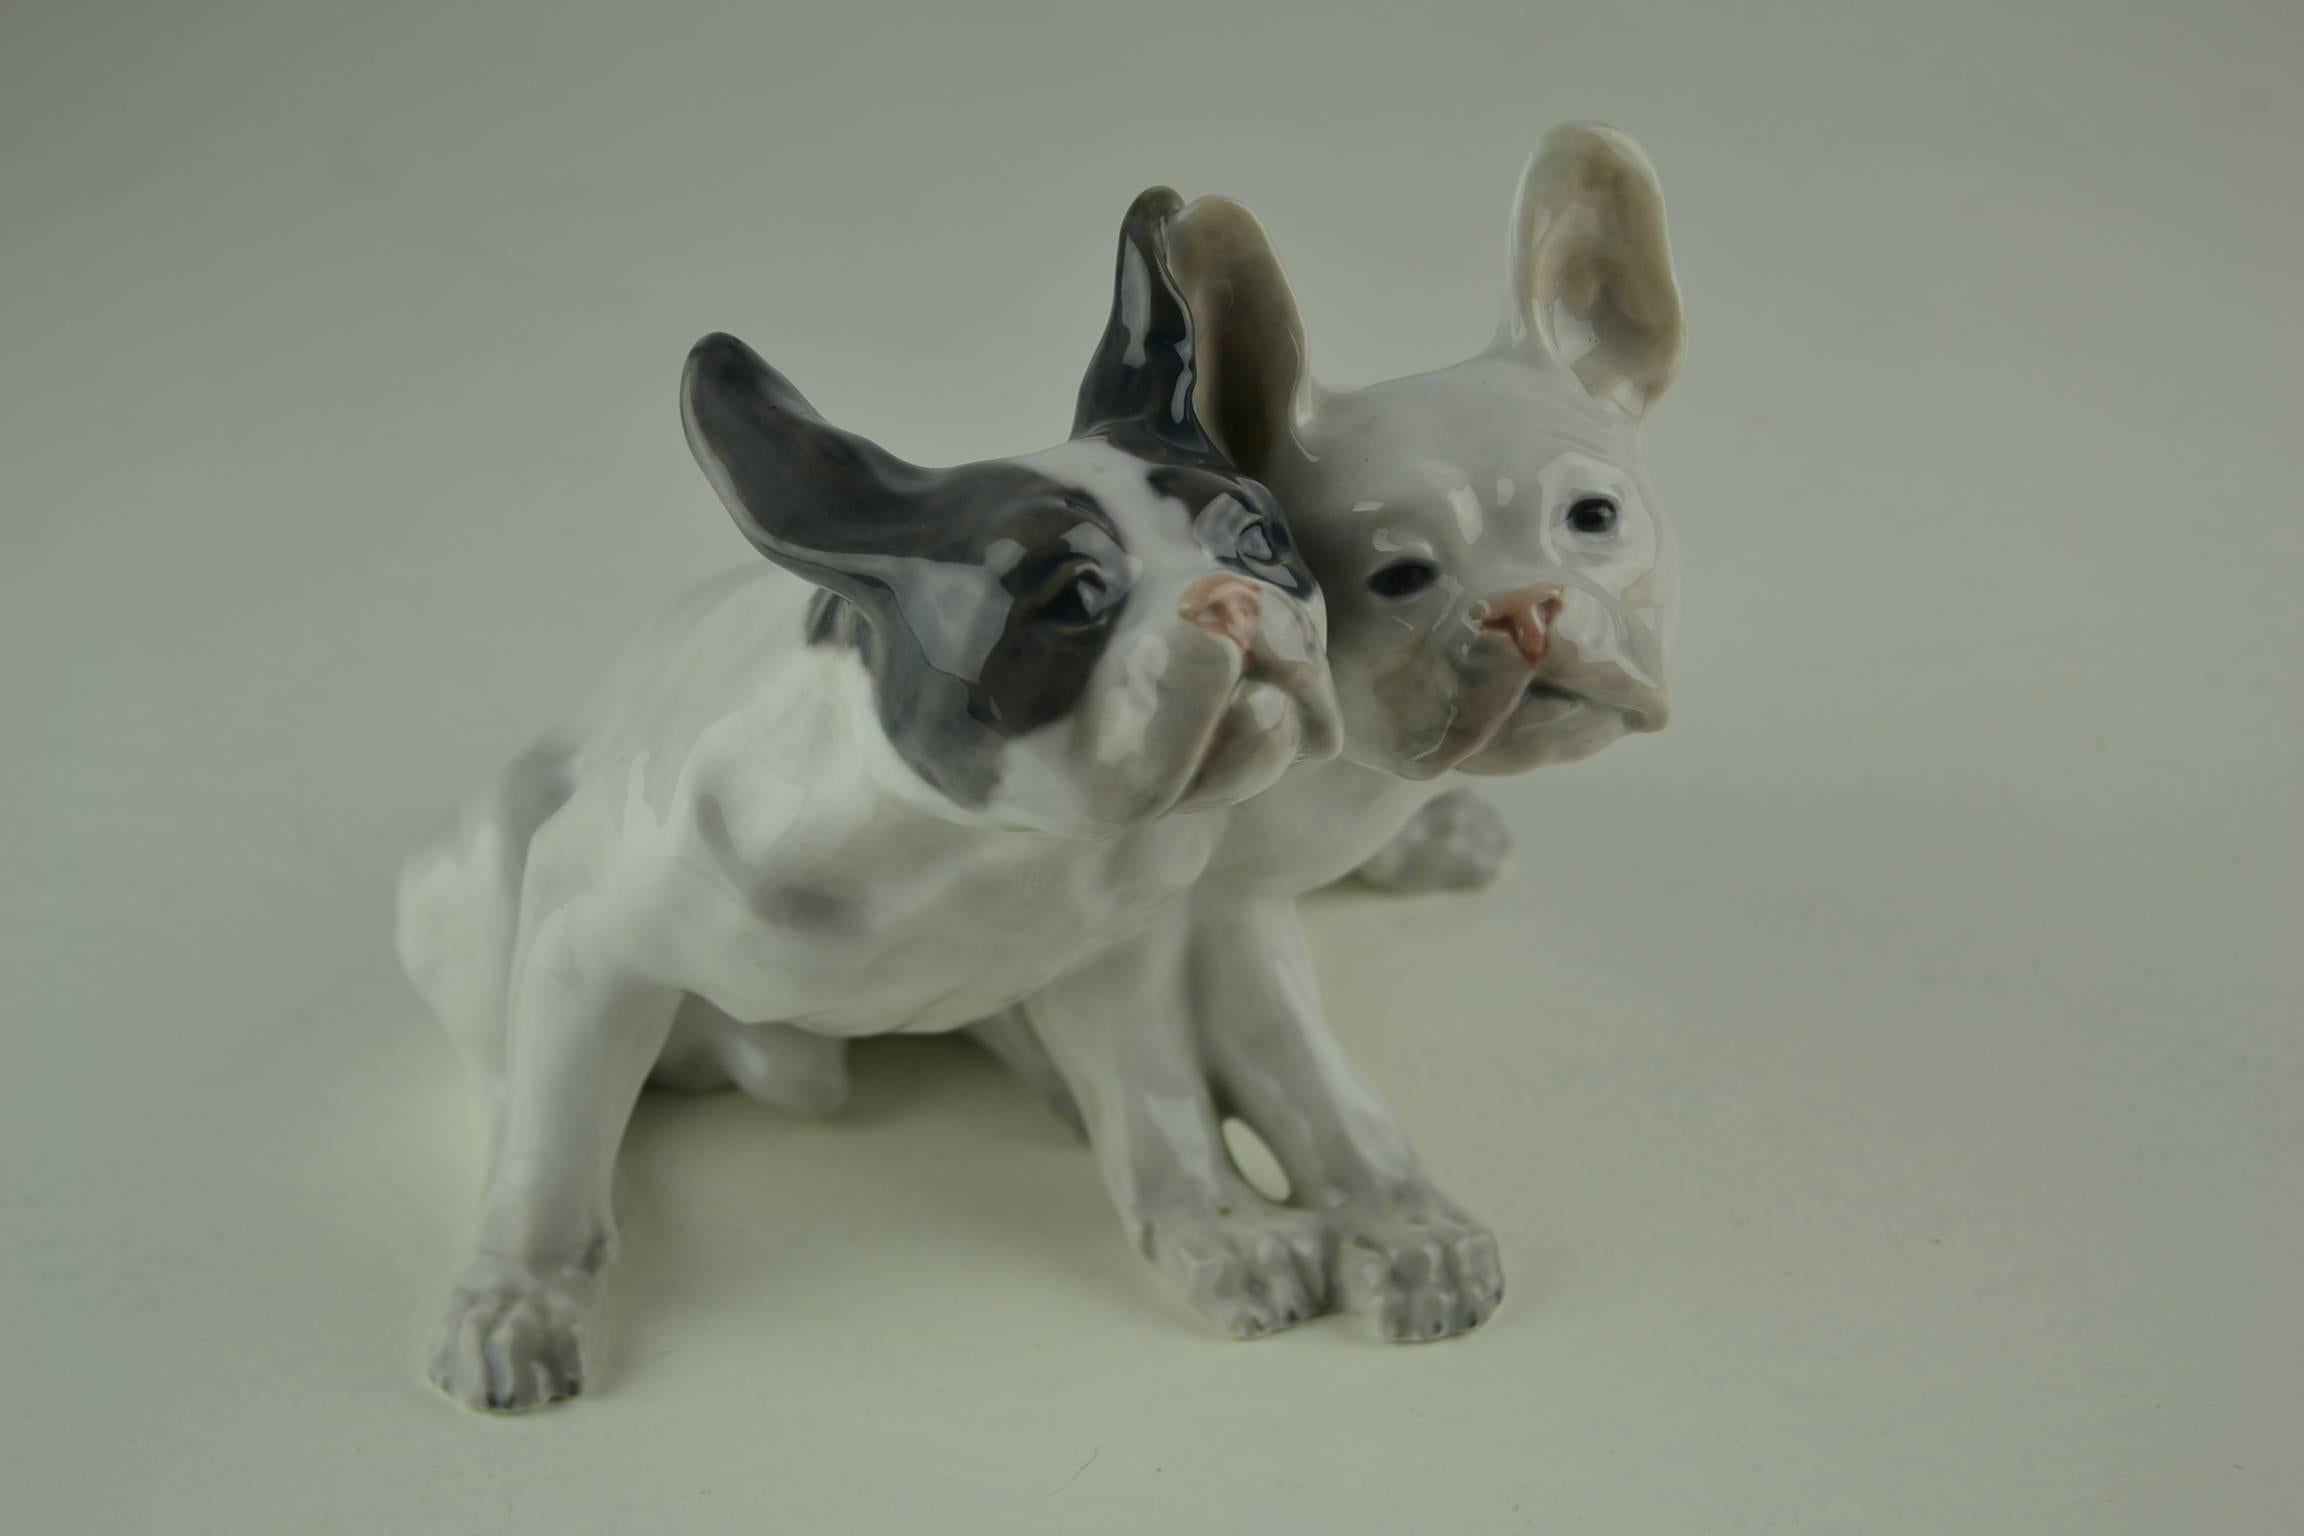 Pair of French Bullies, French bulldogs designed by Knud Kyhn in 1908 and made by porcelain Royal Copenhagen, Denmark with number 1452 / 957. 

Stunning animal figure of cute French bulldog puppies sitting together.

For collector of antique